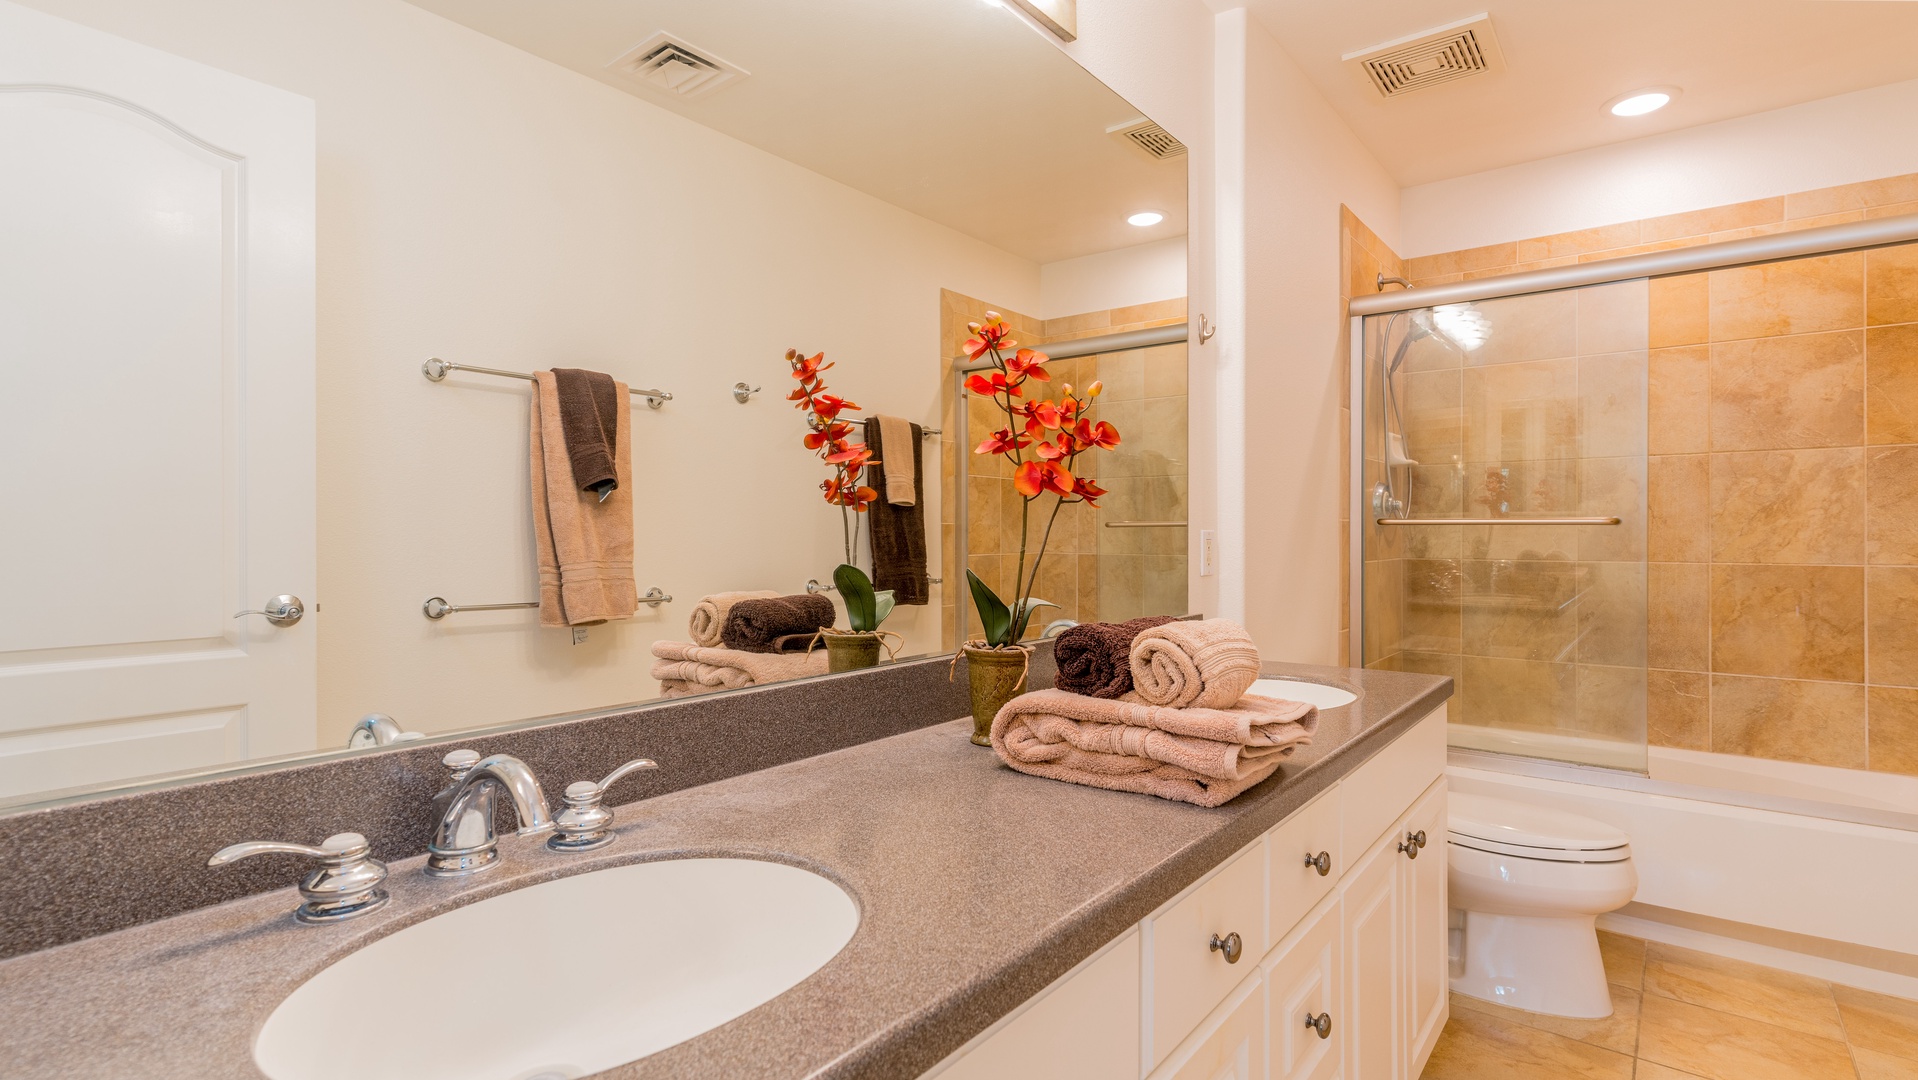 Kapolei Vacation Rentals, Ko Olina Kai 1057B - The primary guest bathroom with a double vanity and shower.